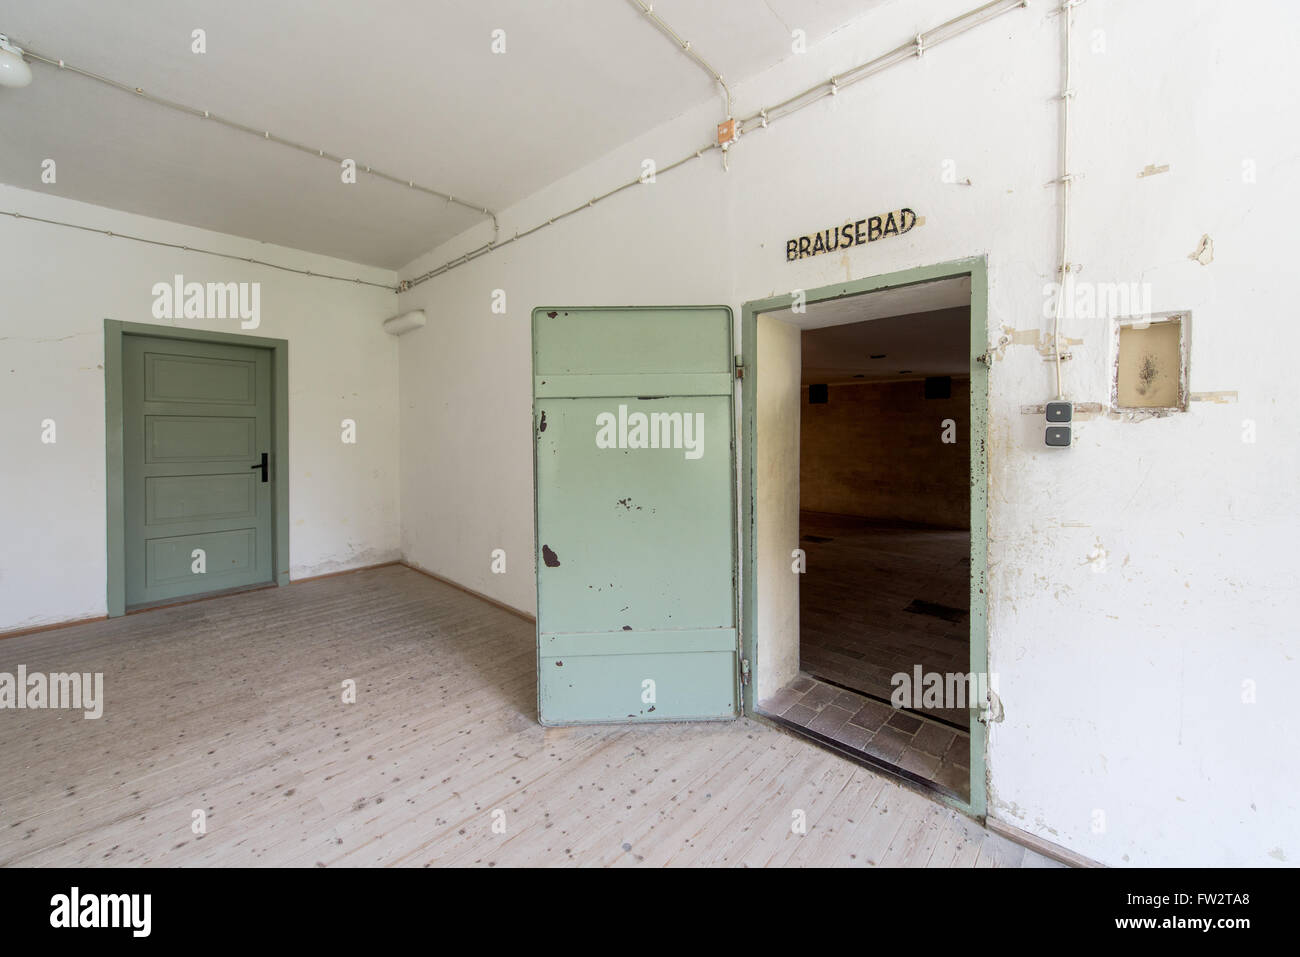 https://c8.alamy.com/comp/FW2TA8/entrance-to-the-gas-chamber-showers-in-dachau-concentration-camp-FW2TA8.jpg